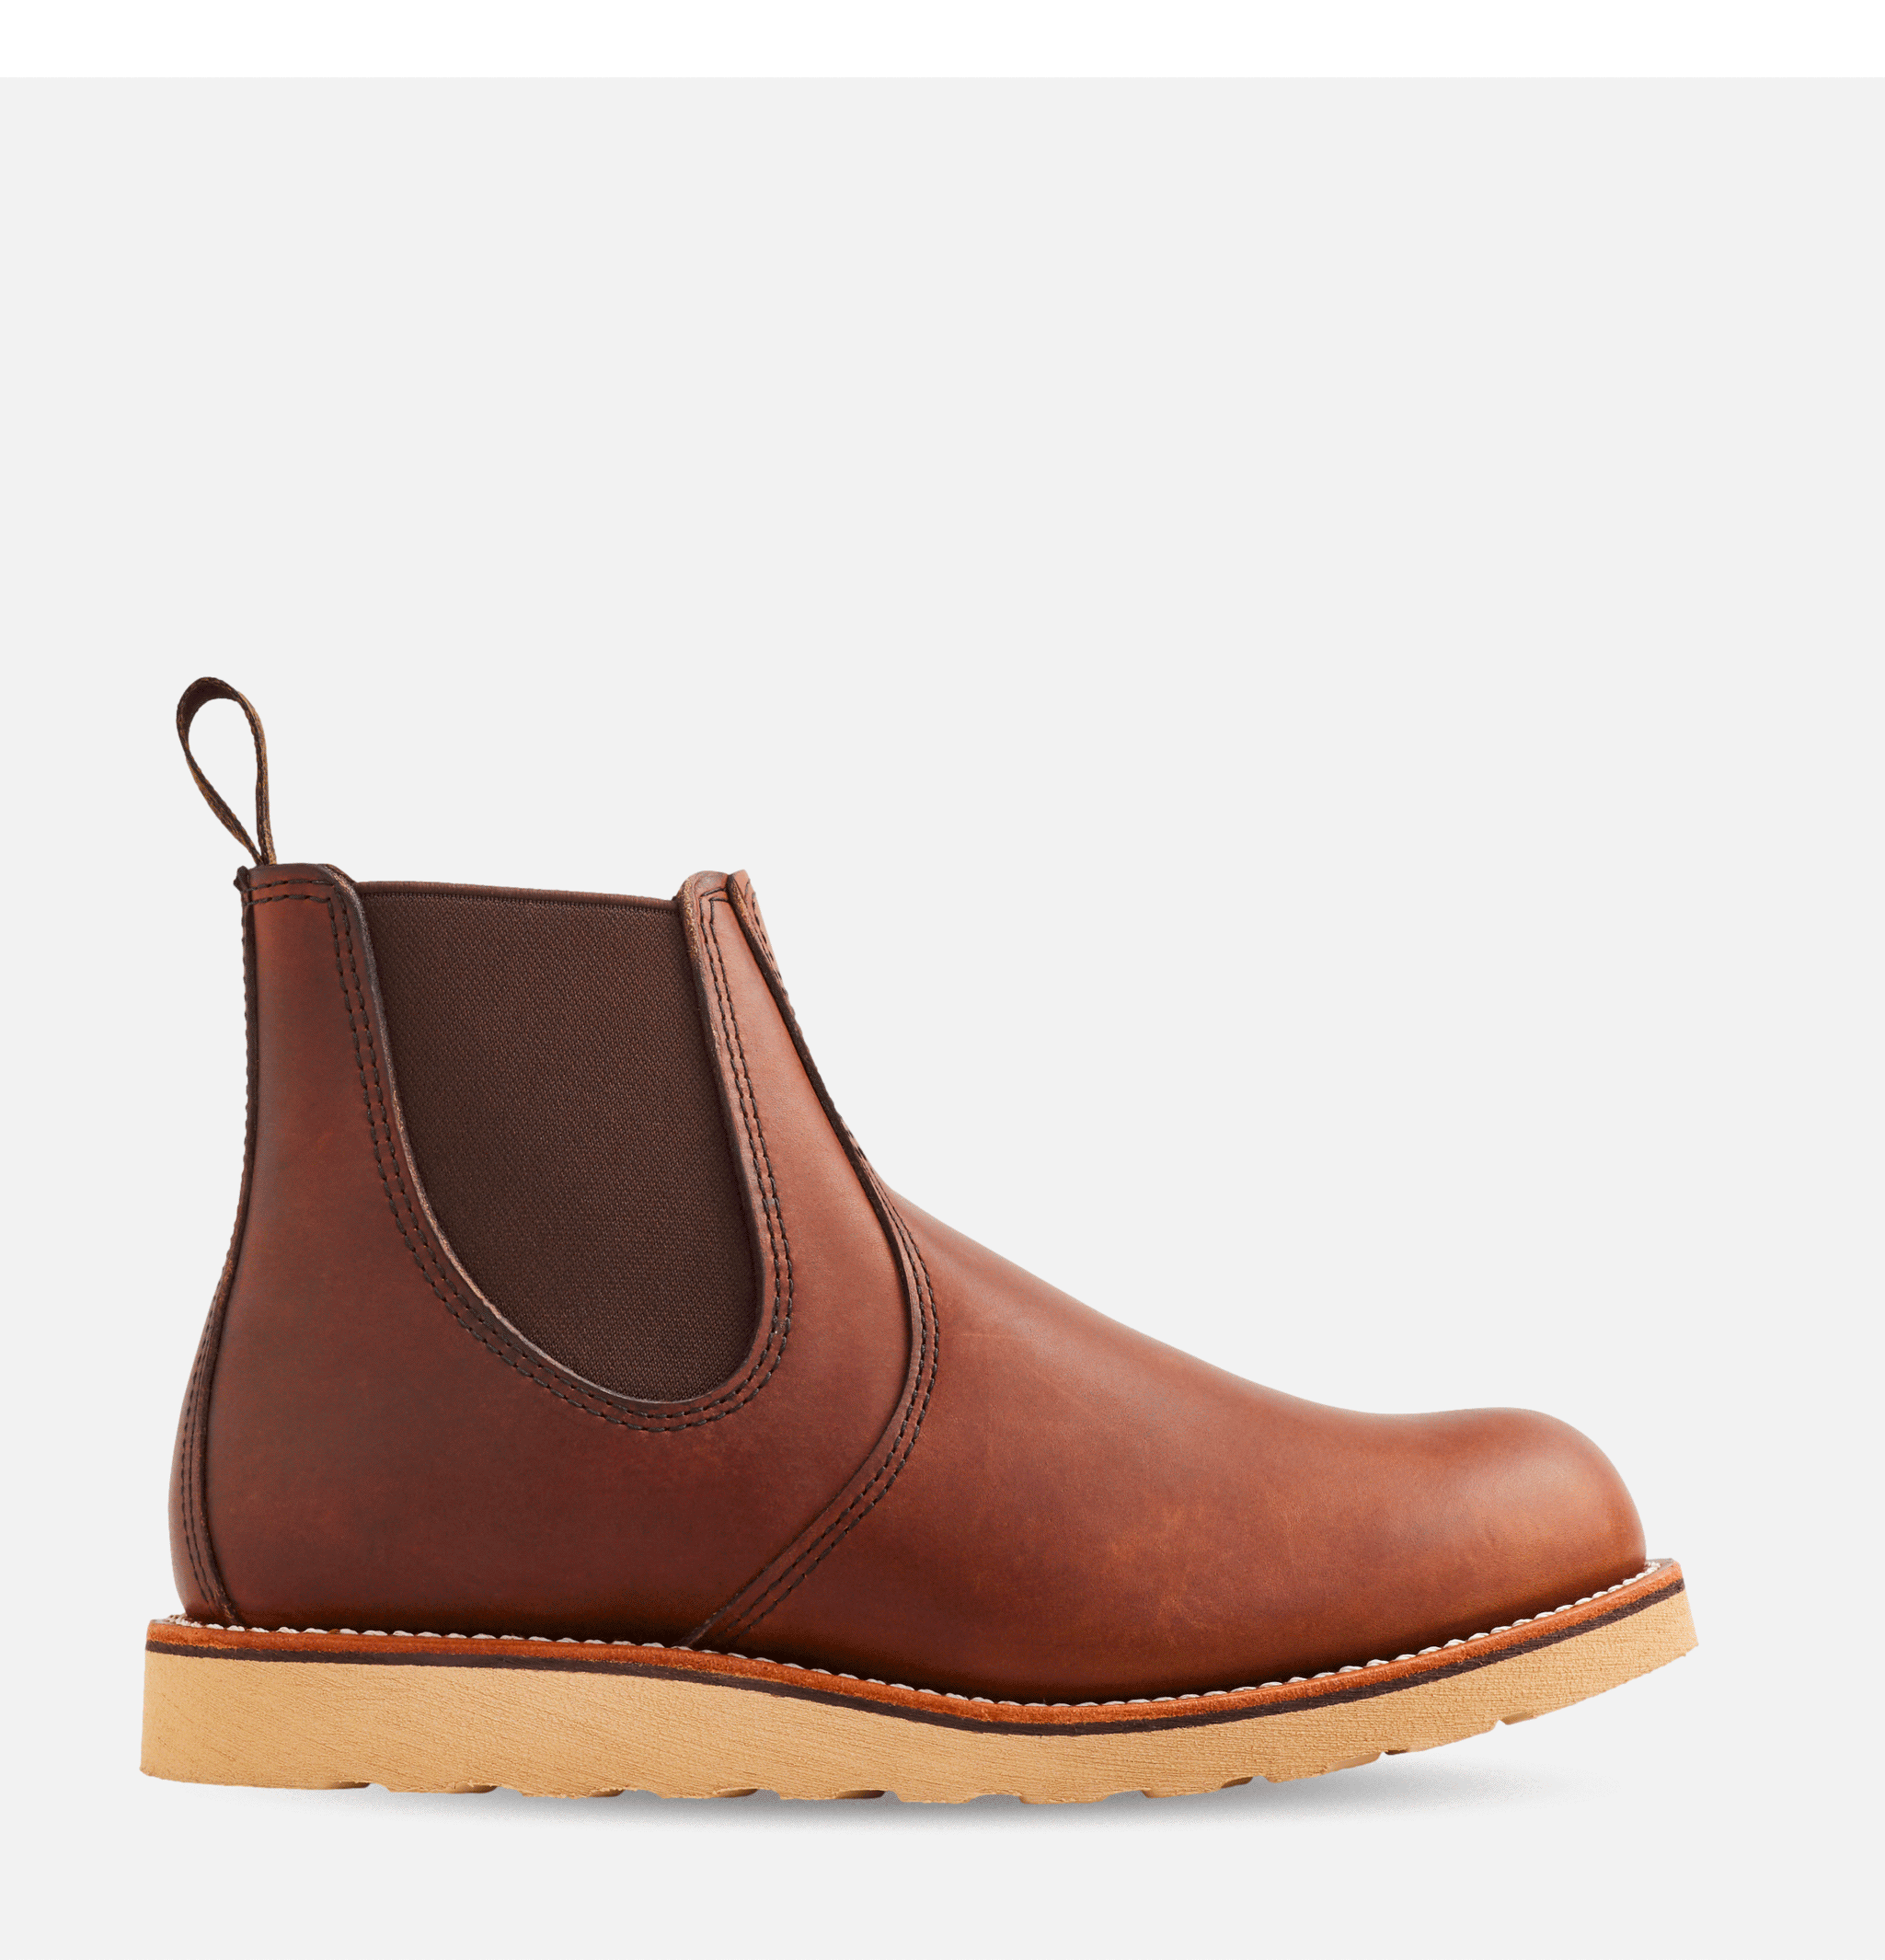 3190 - Rover Chelsea Boots Amber Harness